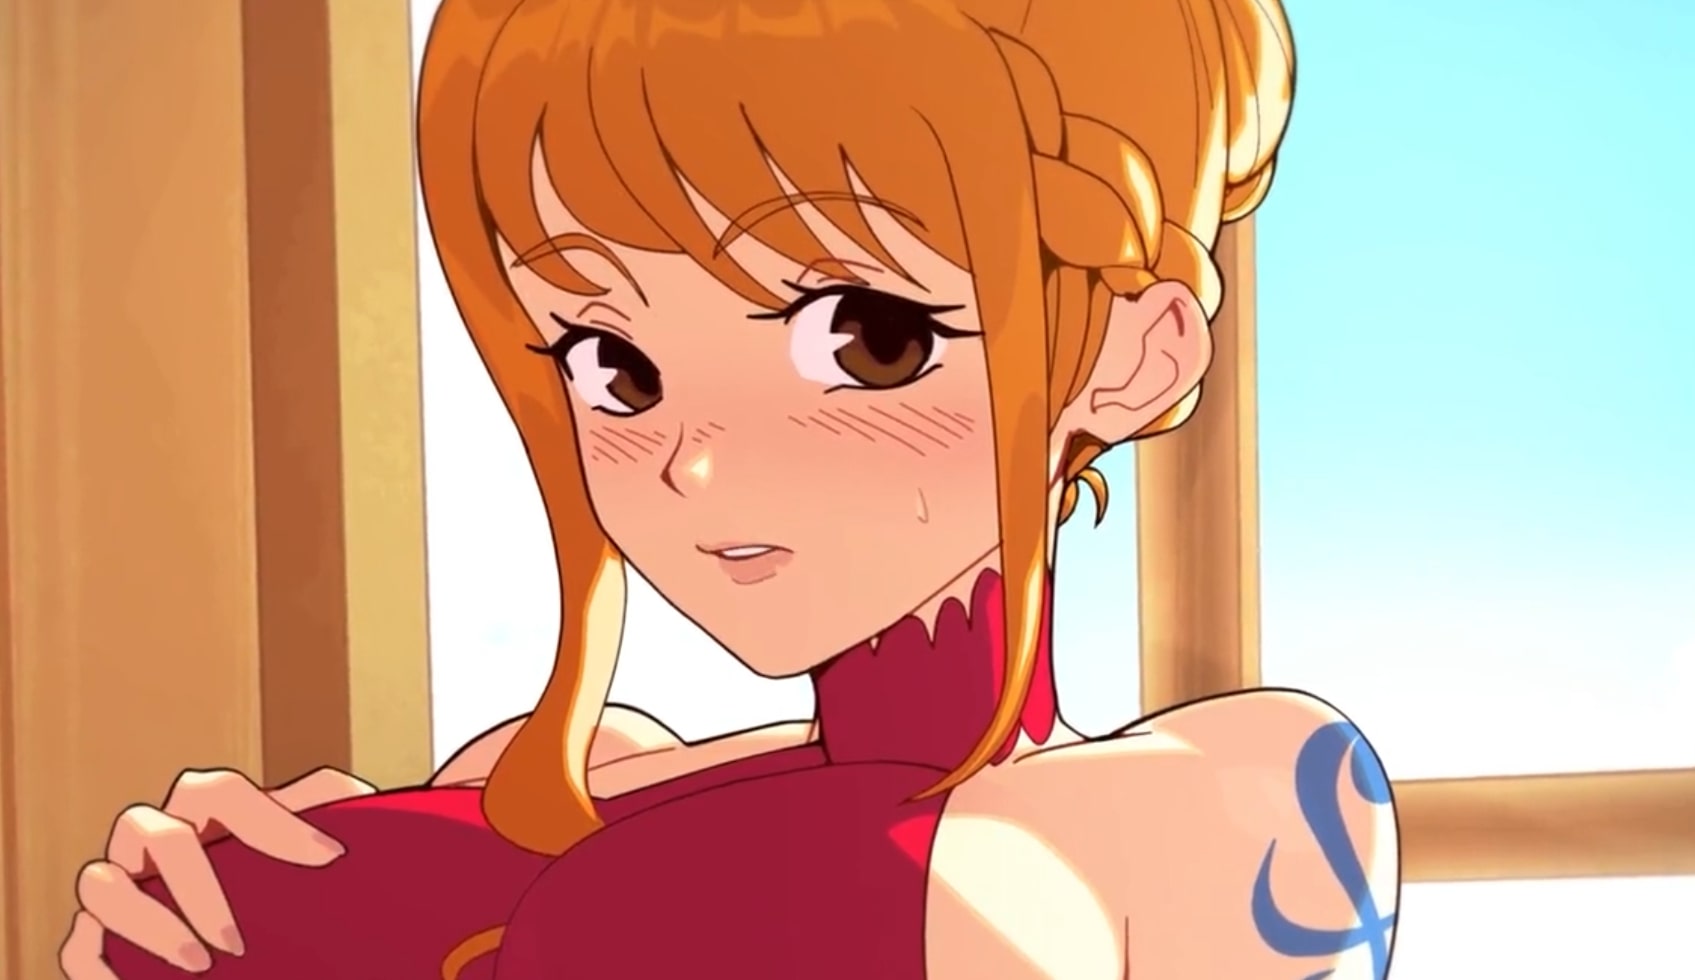 Nami can be persuasive when needed gintsu art nsfw